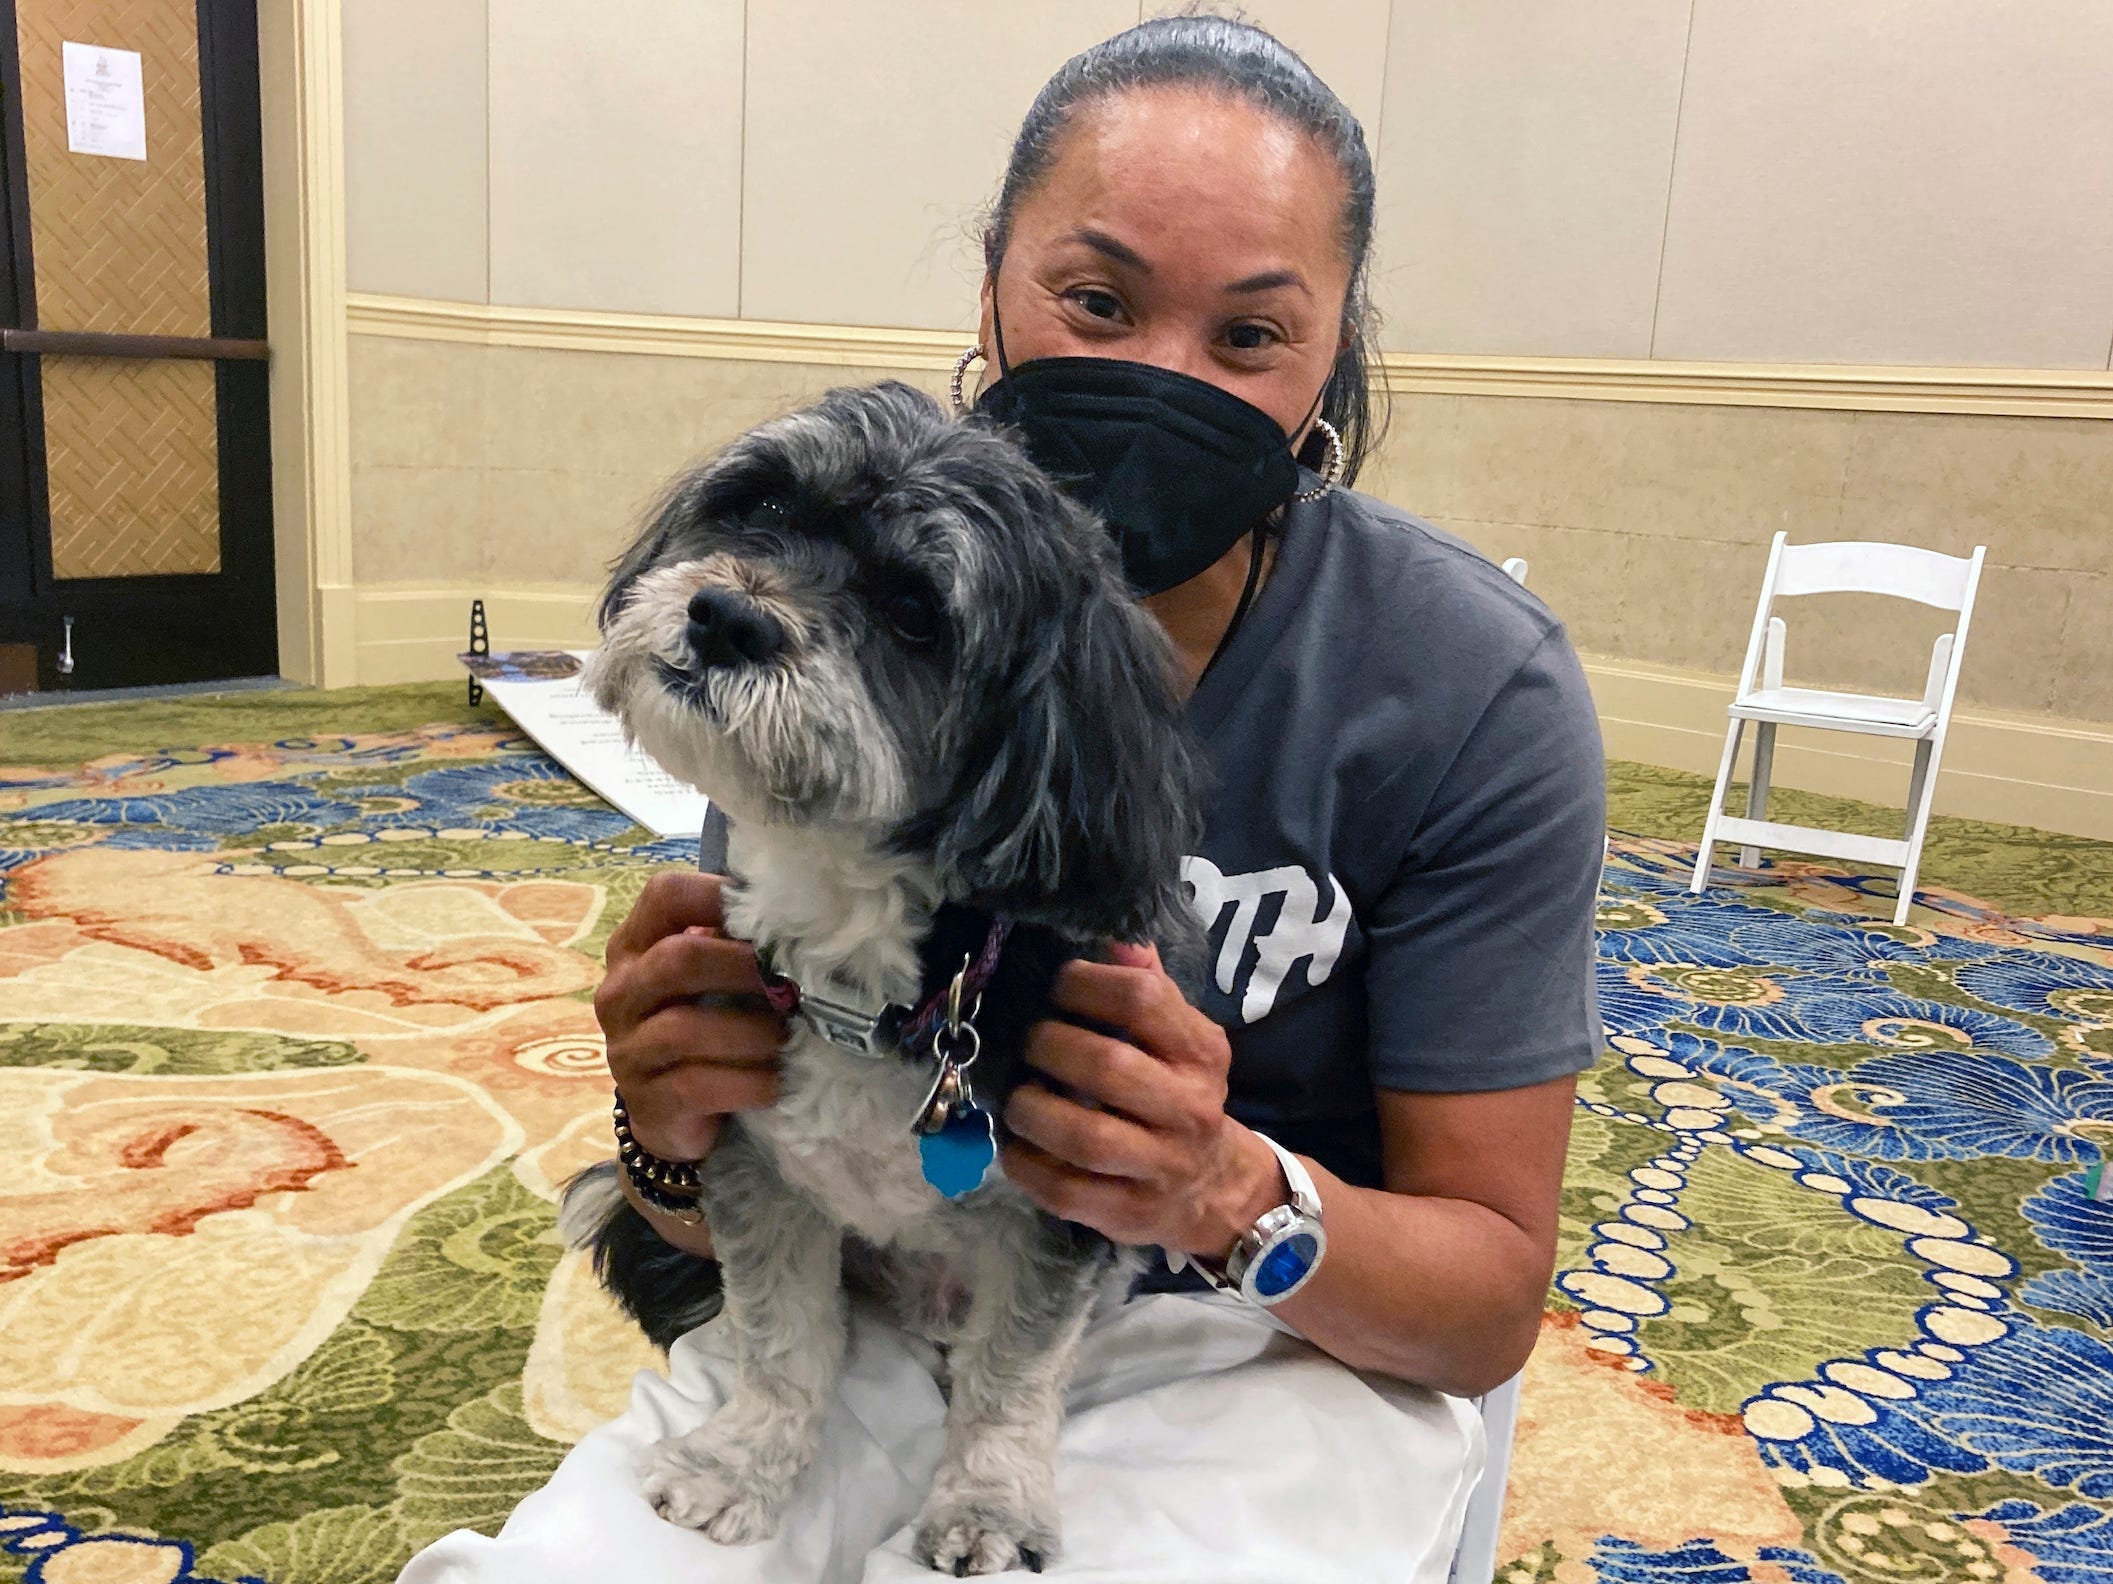 Dawn Staley and her dog, Champ.